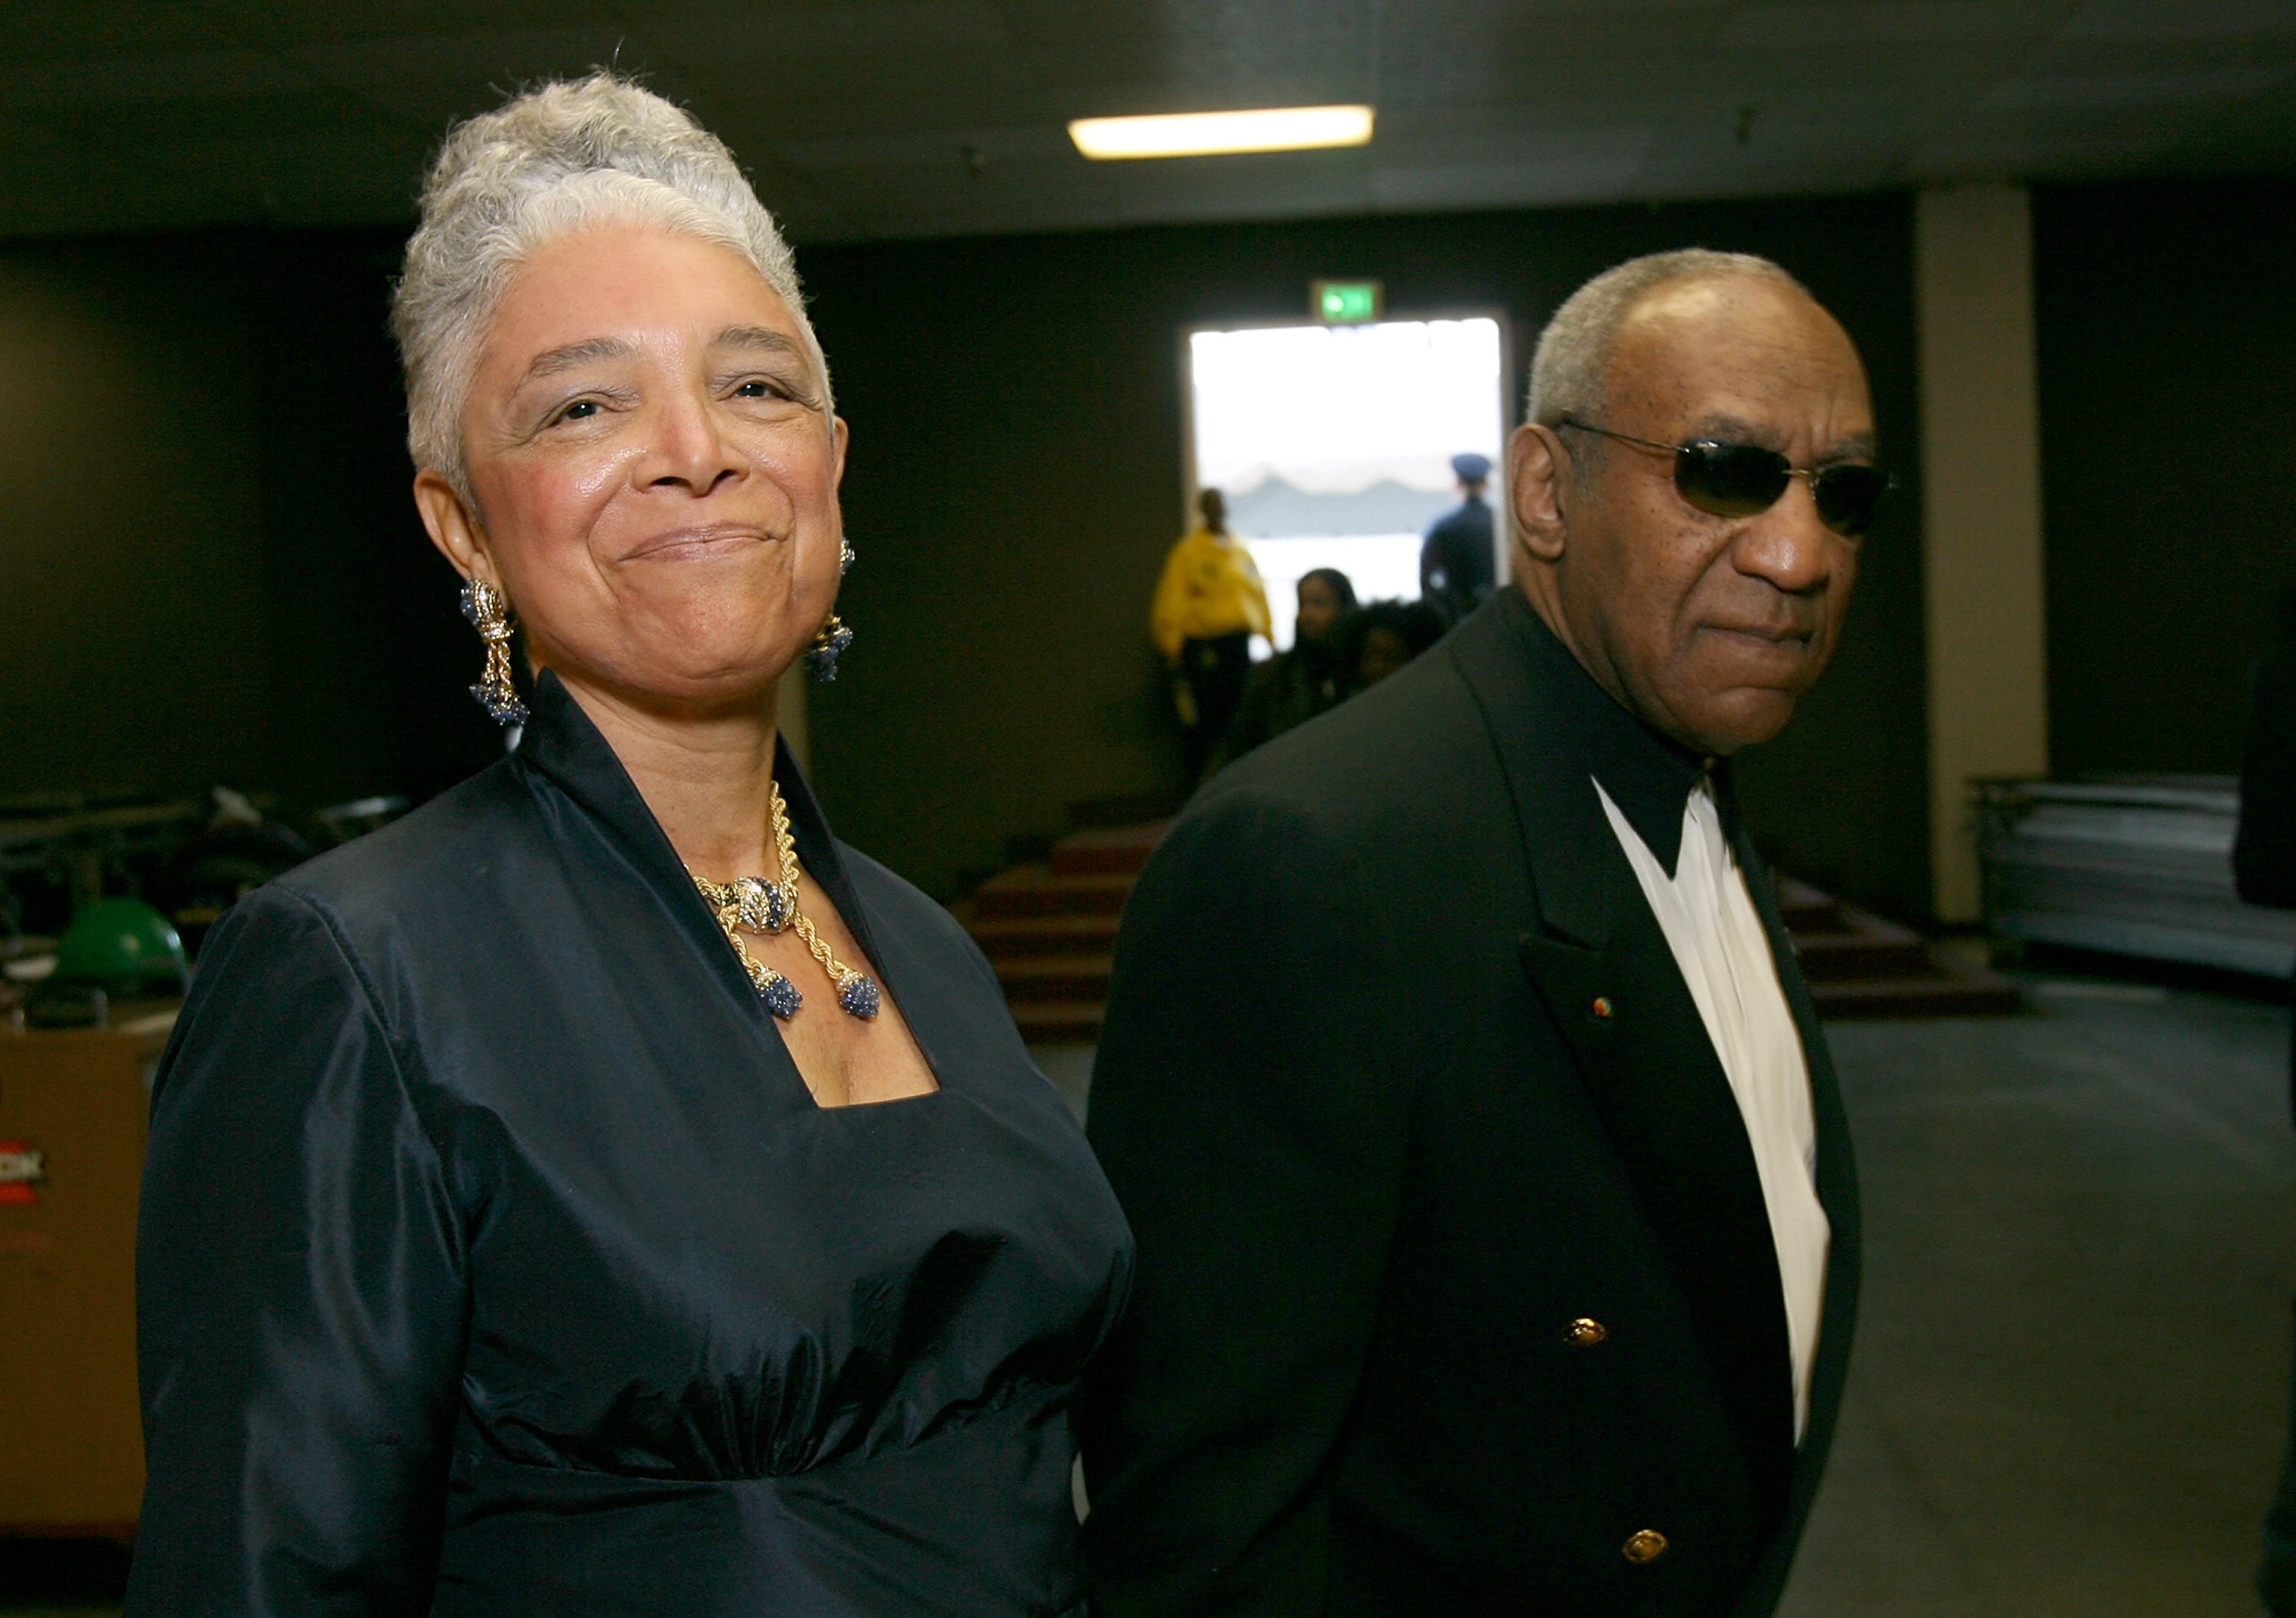 Bill and Camille Cosby walk backstage during the 38th annual NAACP Image Awards at the Shrine Auditorium on March 2, 2007 in Los Angeles, California. | Photo: Getty Images